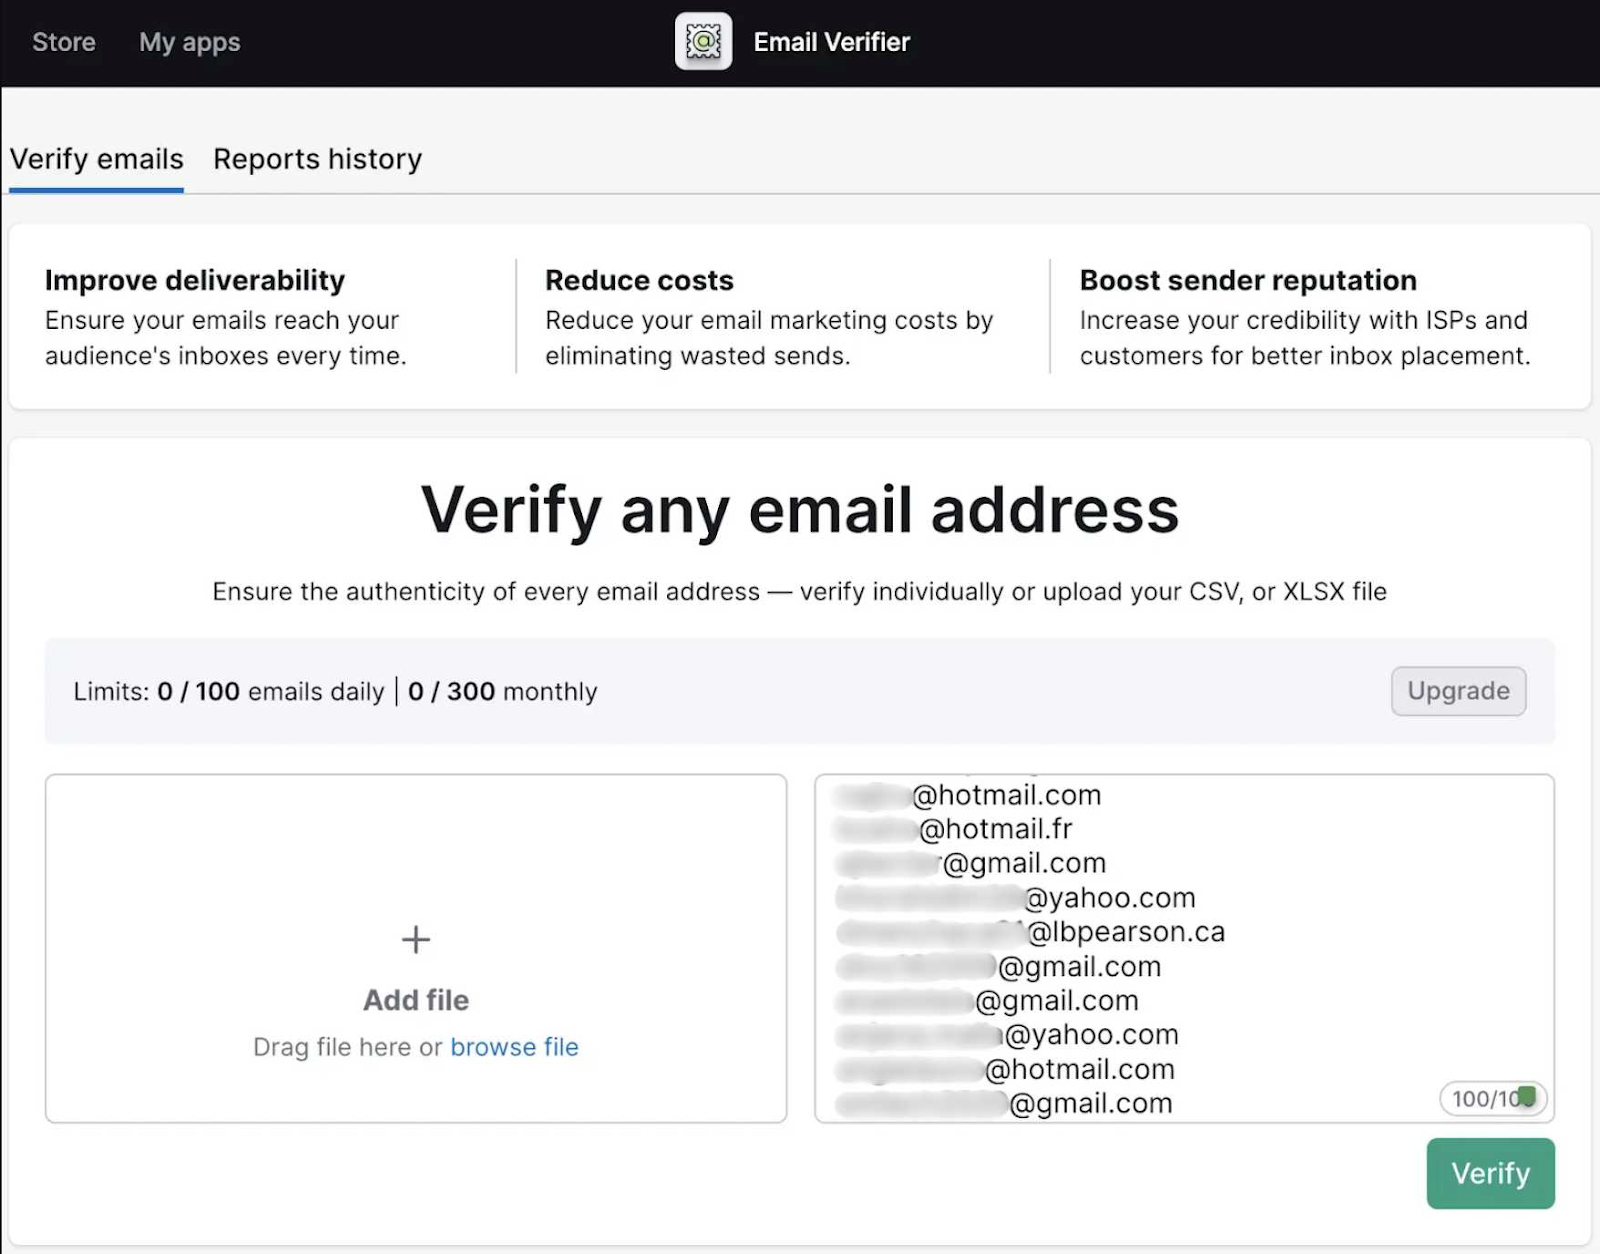 Email Verifier instrumentality   showing the quality  to bulk verify email addresses.